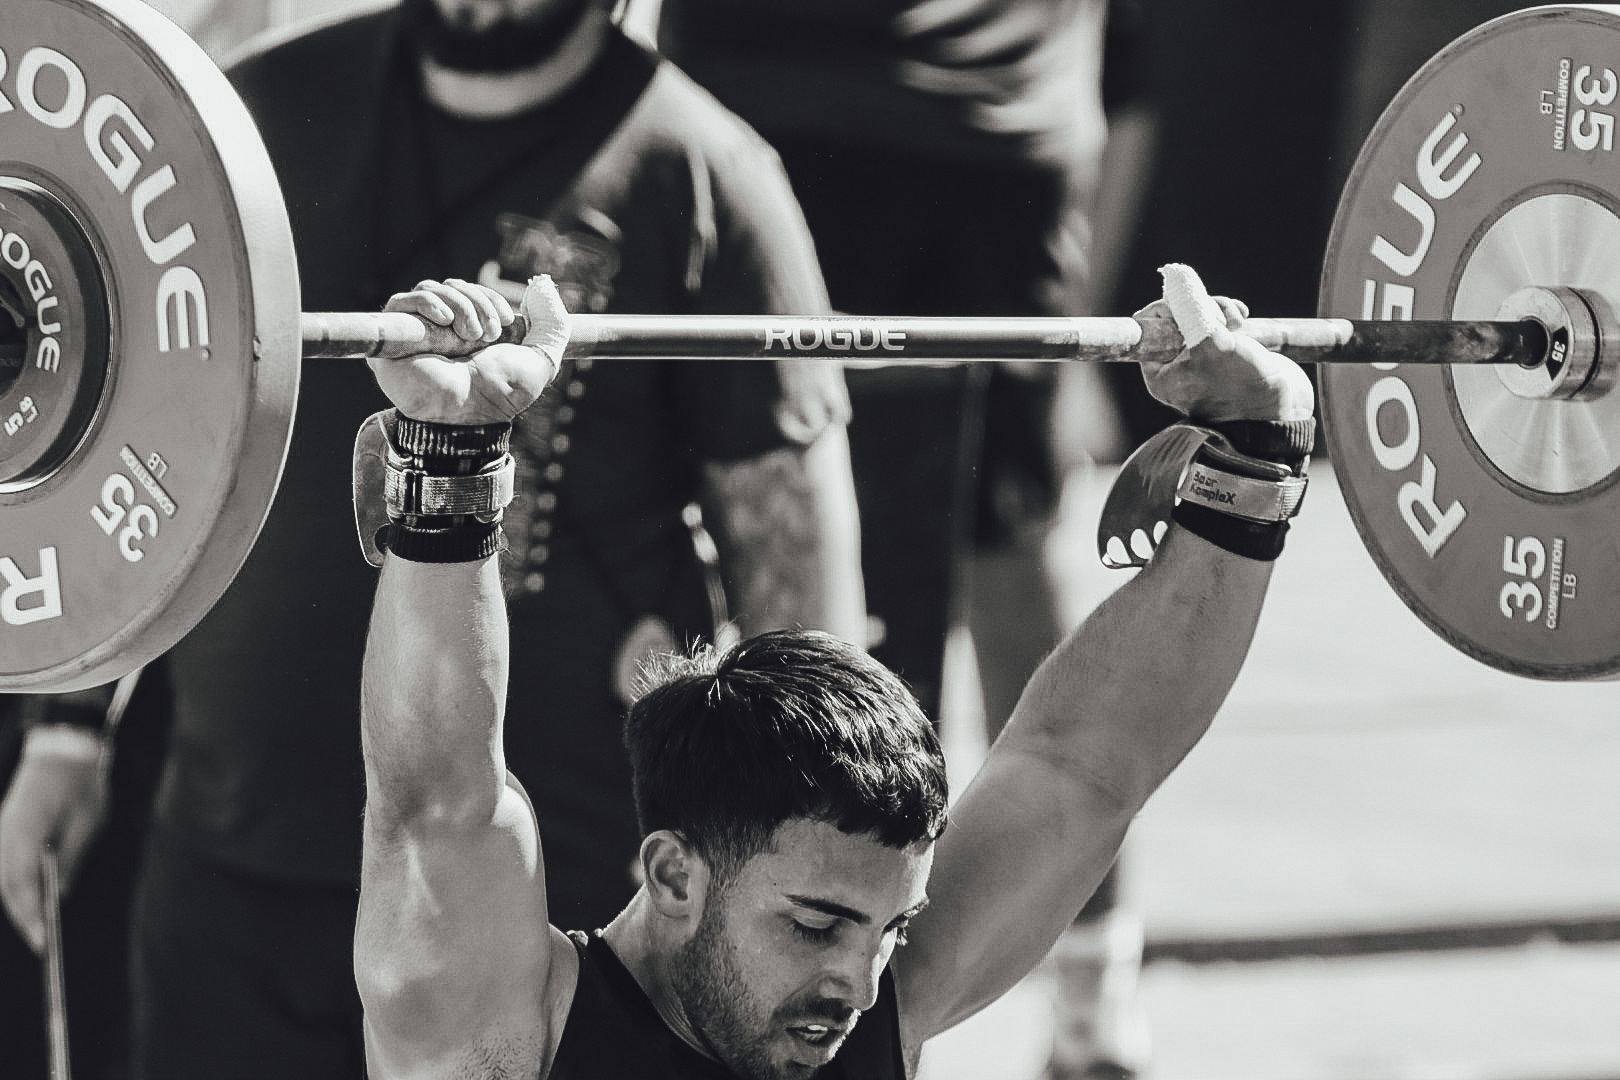 Invictus Athlete, Lalo Torres, drops a successful lift in competition from overhead.